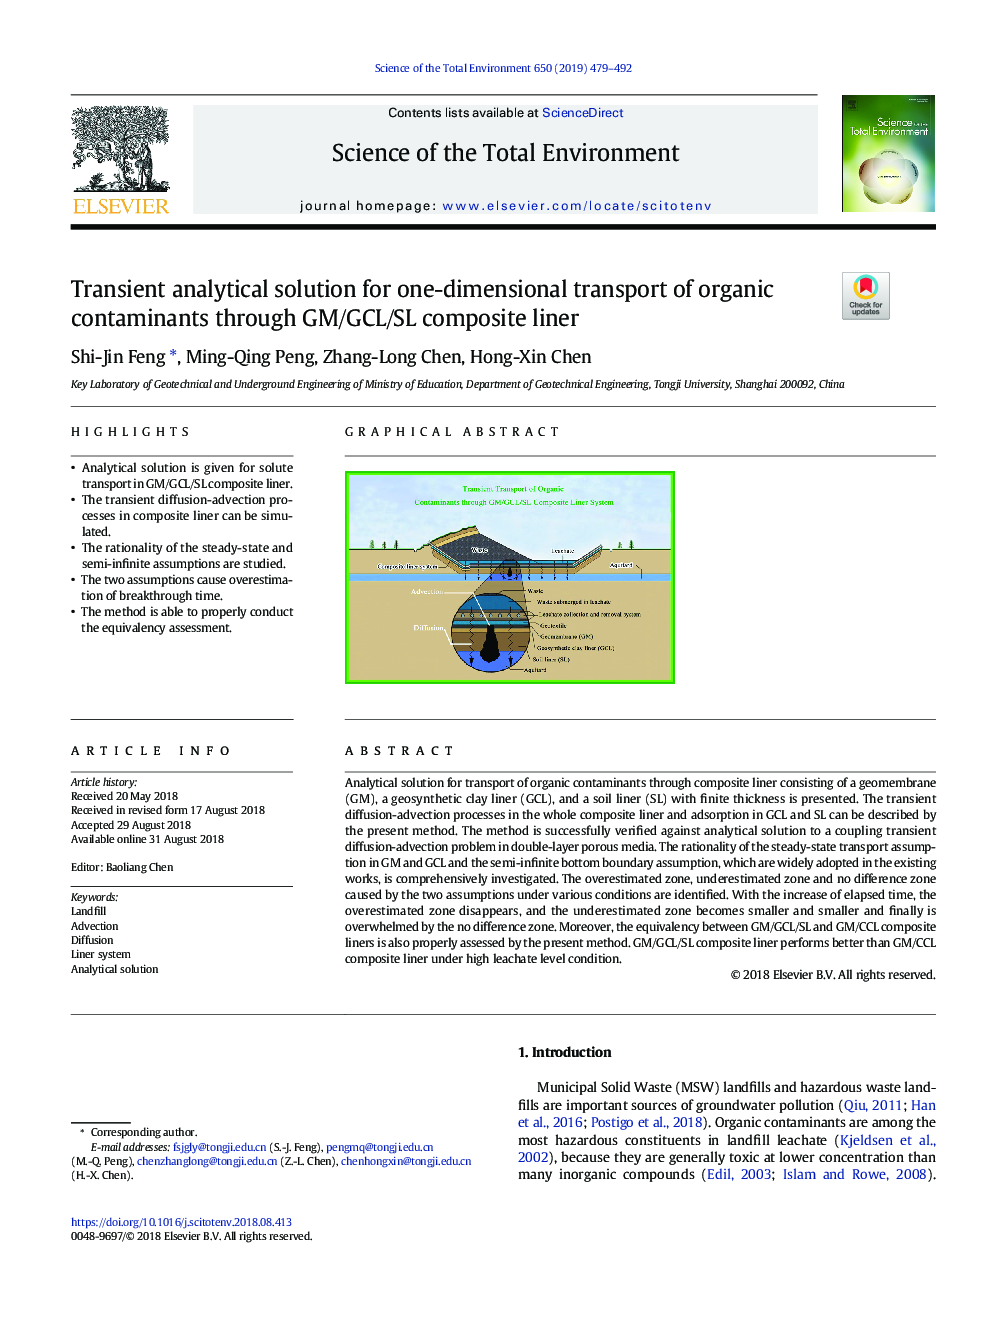 Transient analytical solution for one-dimensional transport of organic contaminants through GM/GCL/SL composite liner